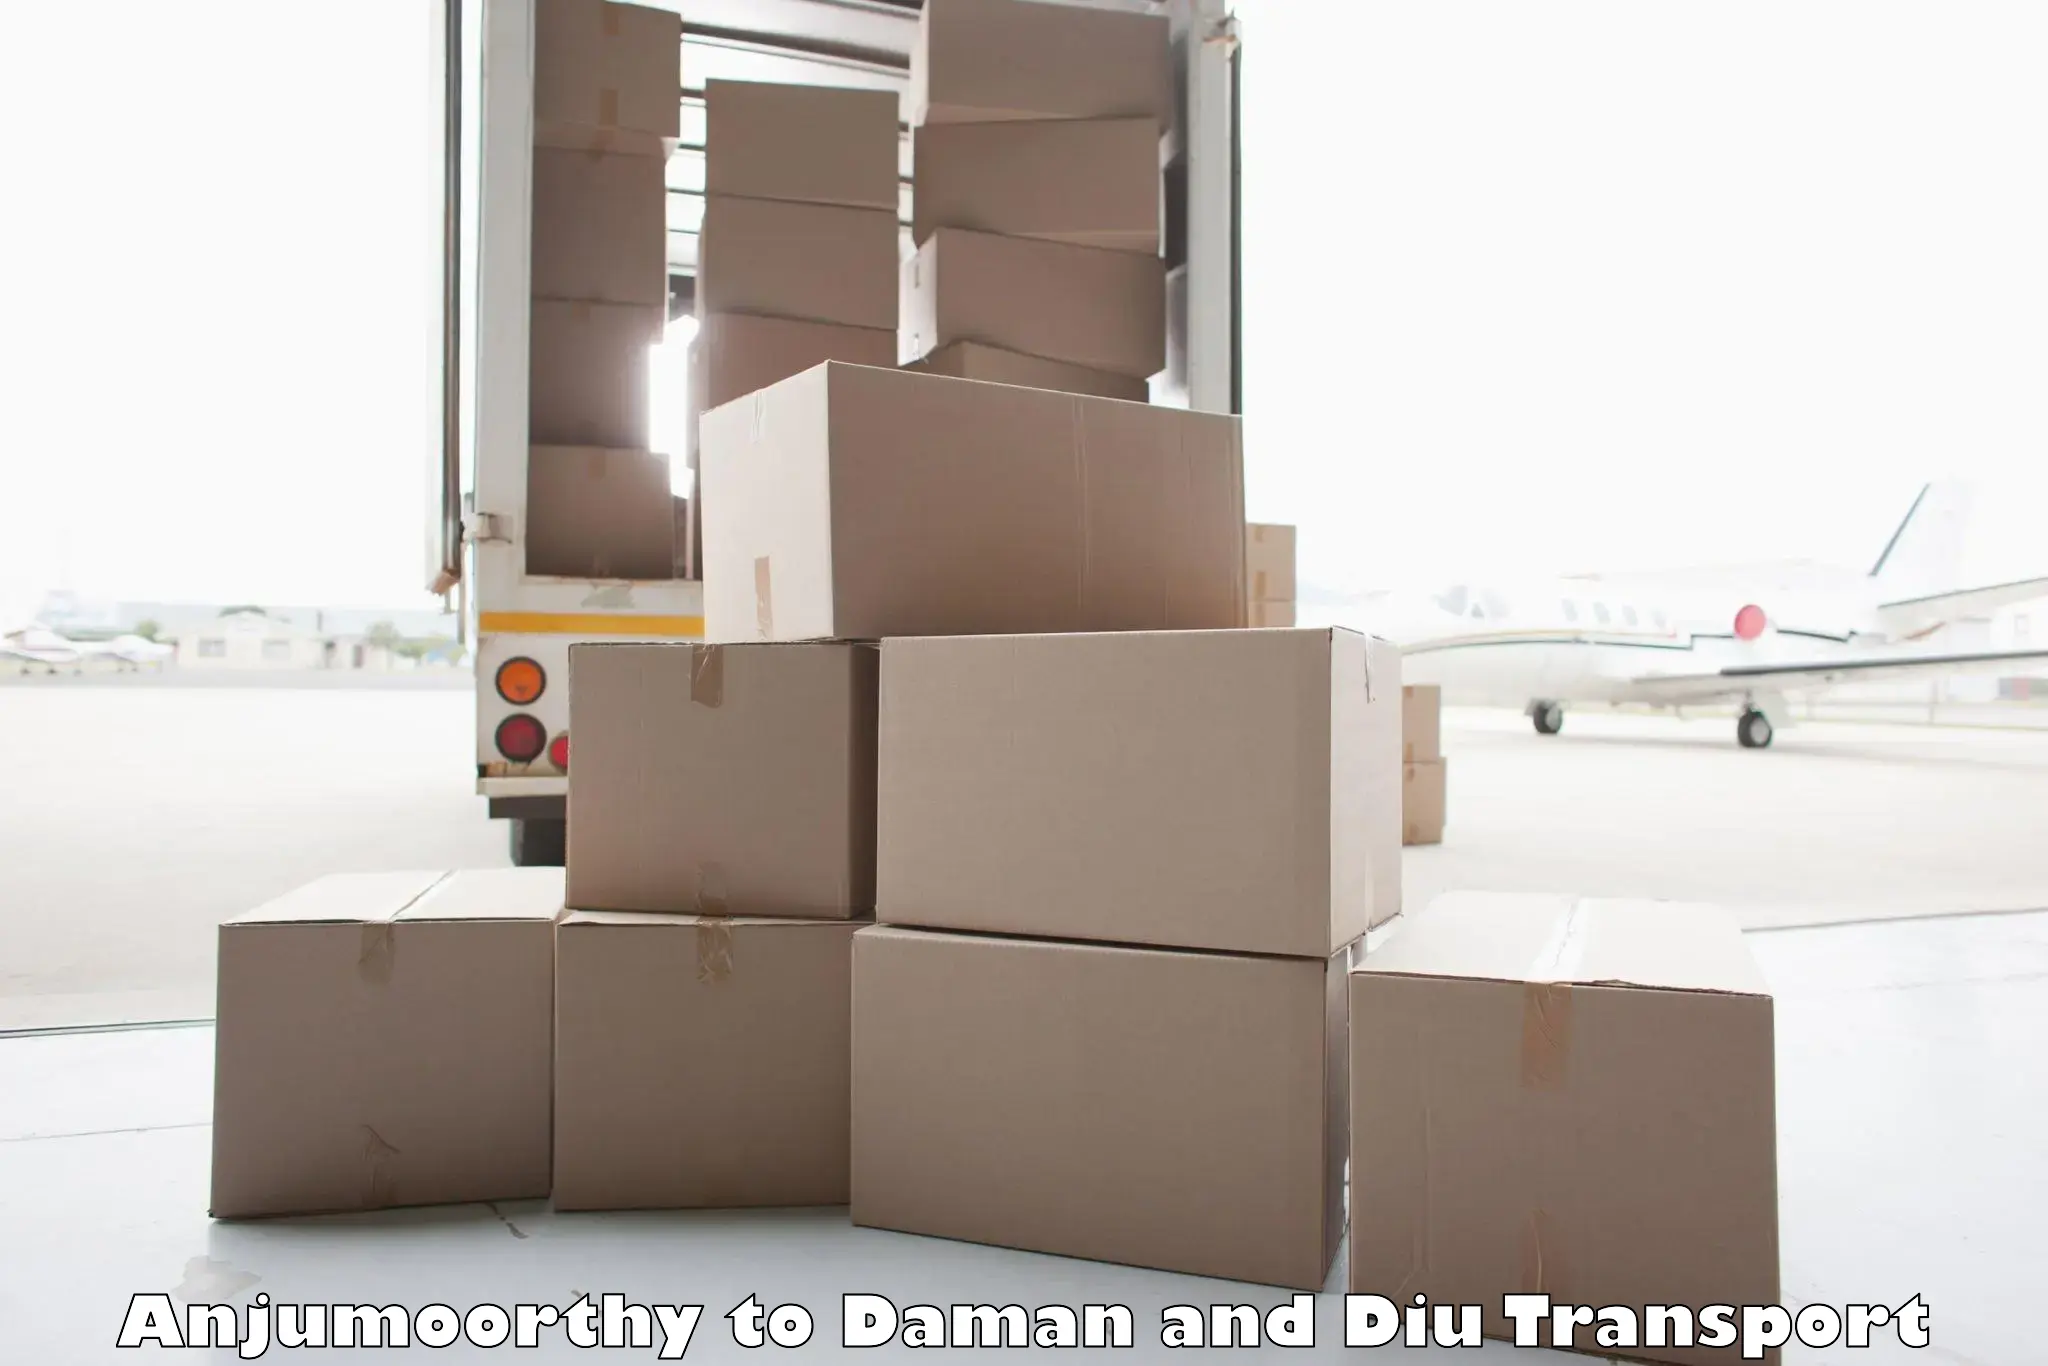 Interstate transport services Anjumoorthy to Daman and Diu